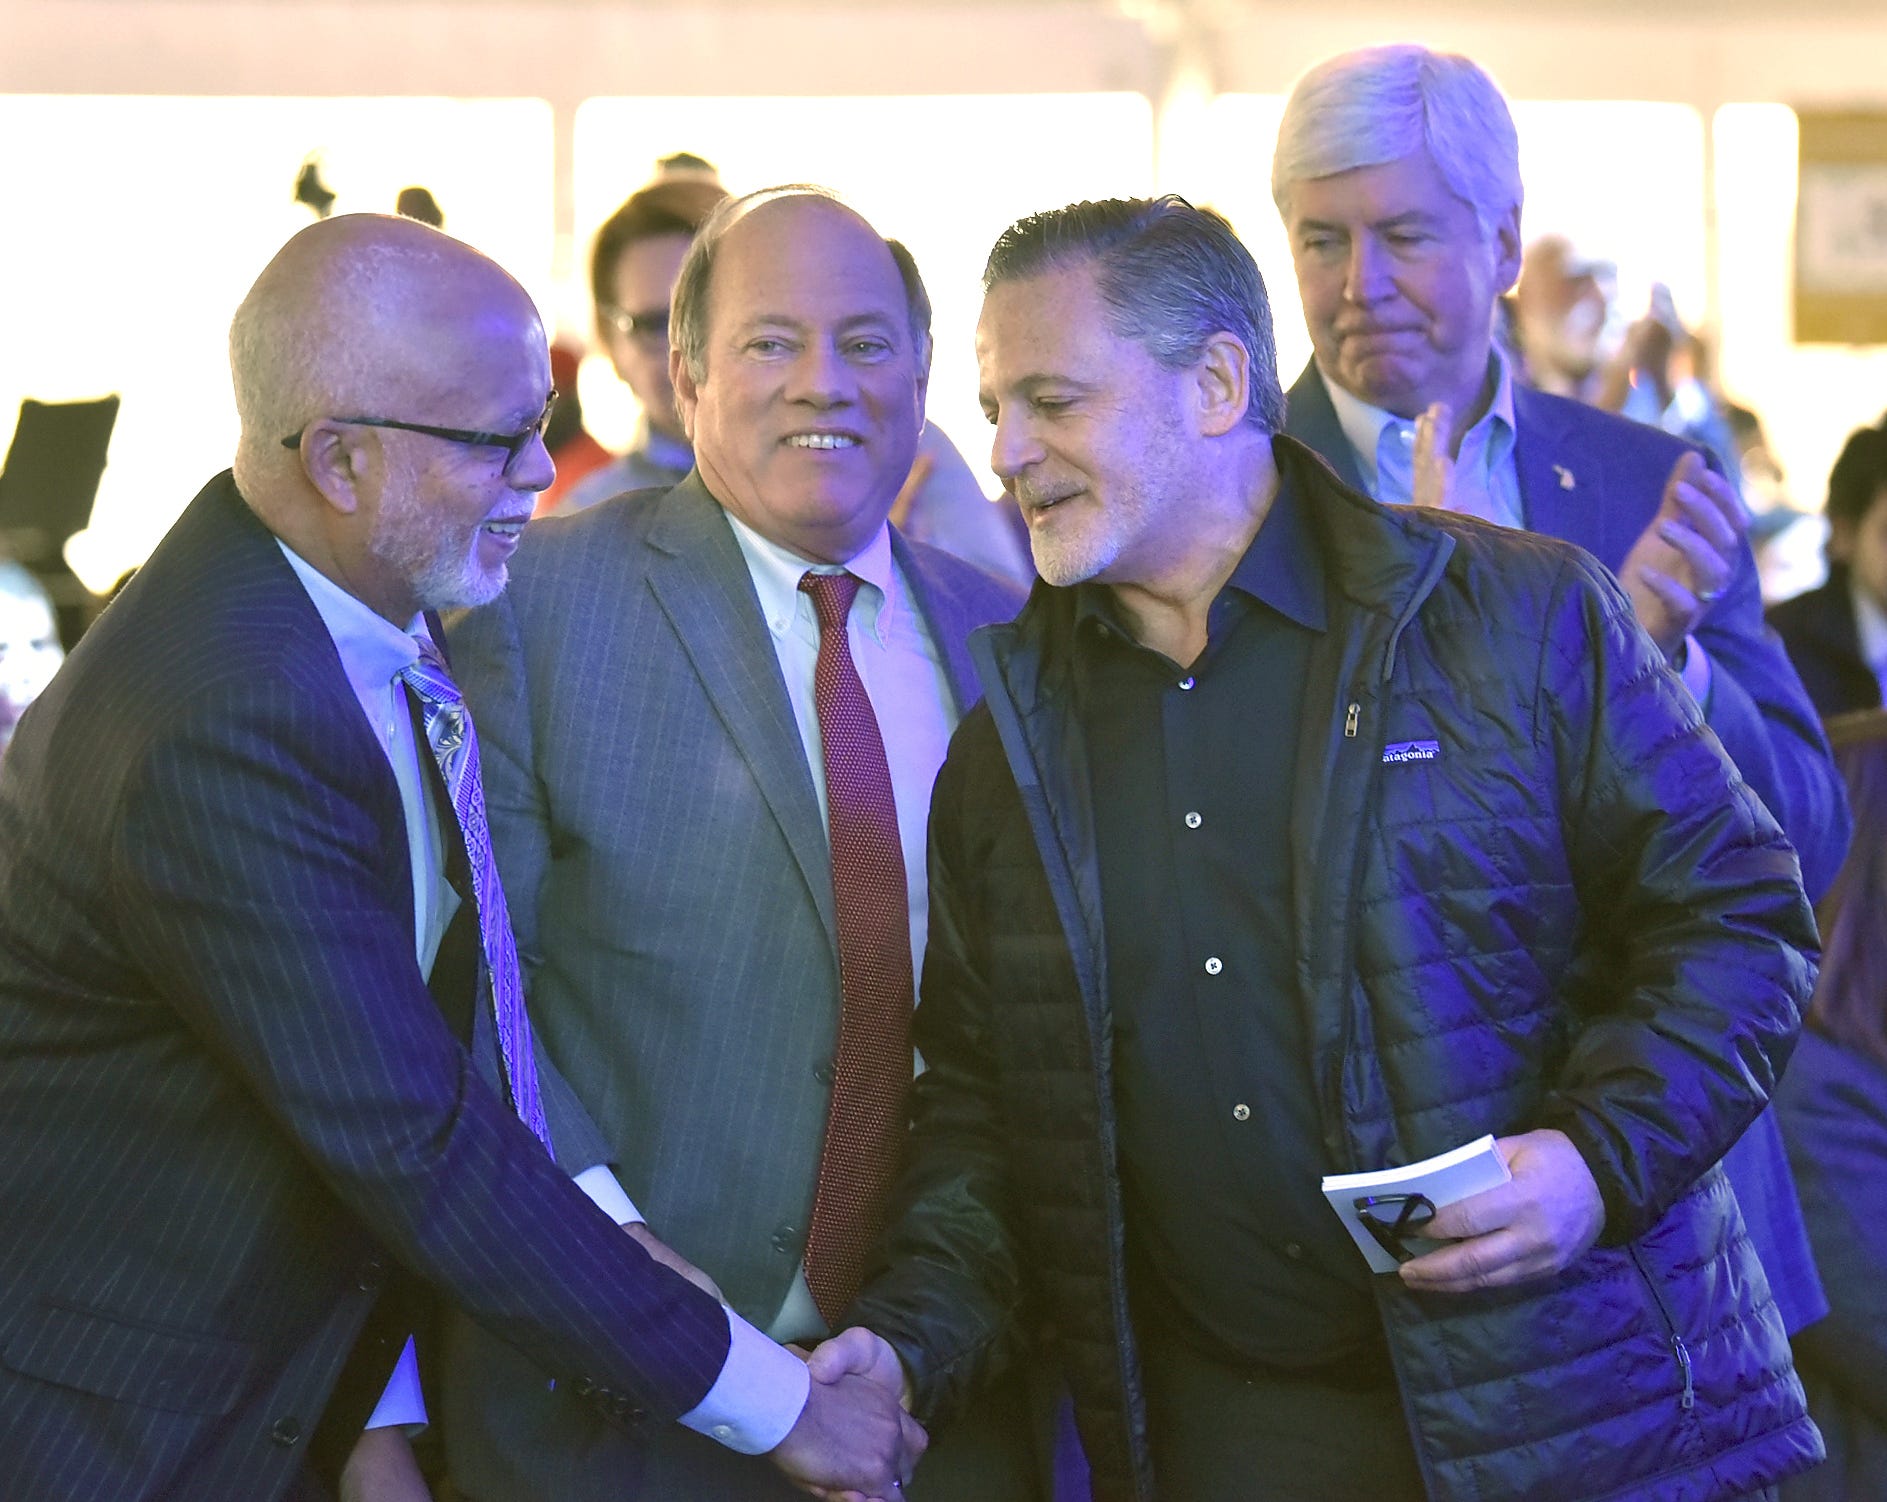 Bedrock Chairman Dan Gilbert, second from right, shakes hands with, left to right, Wayne County Executive Warren Evans, Detroit Mayor Mike Duggan and Michigan Governor Rick Snyder after he speaks.